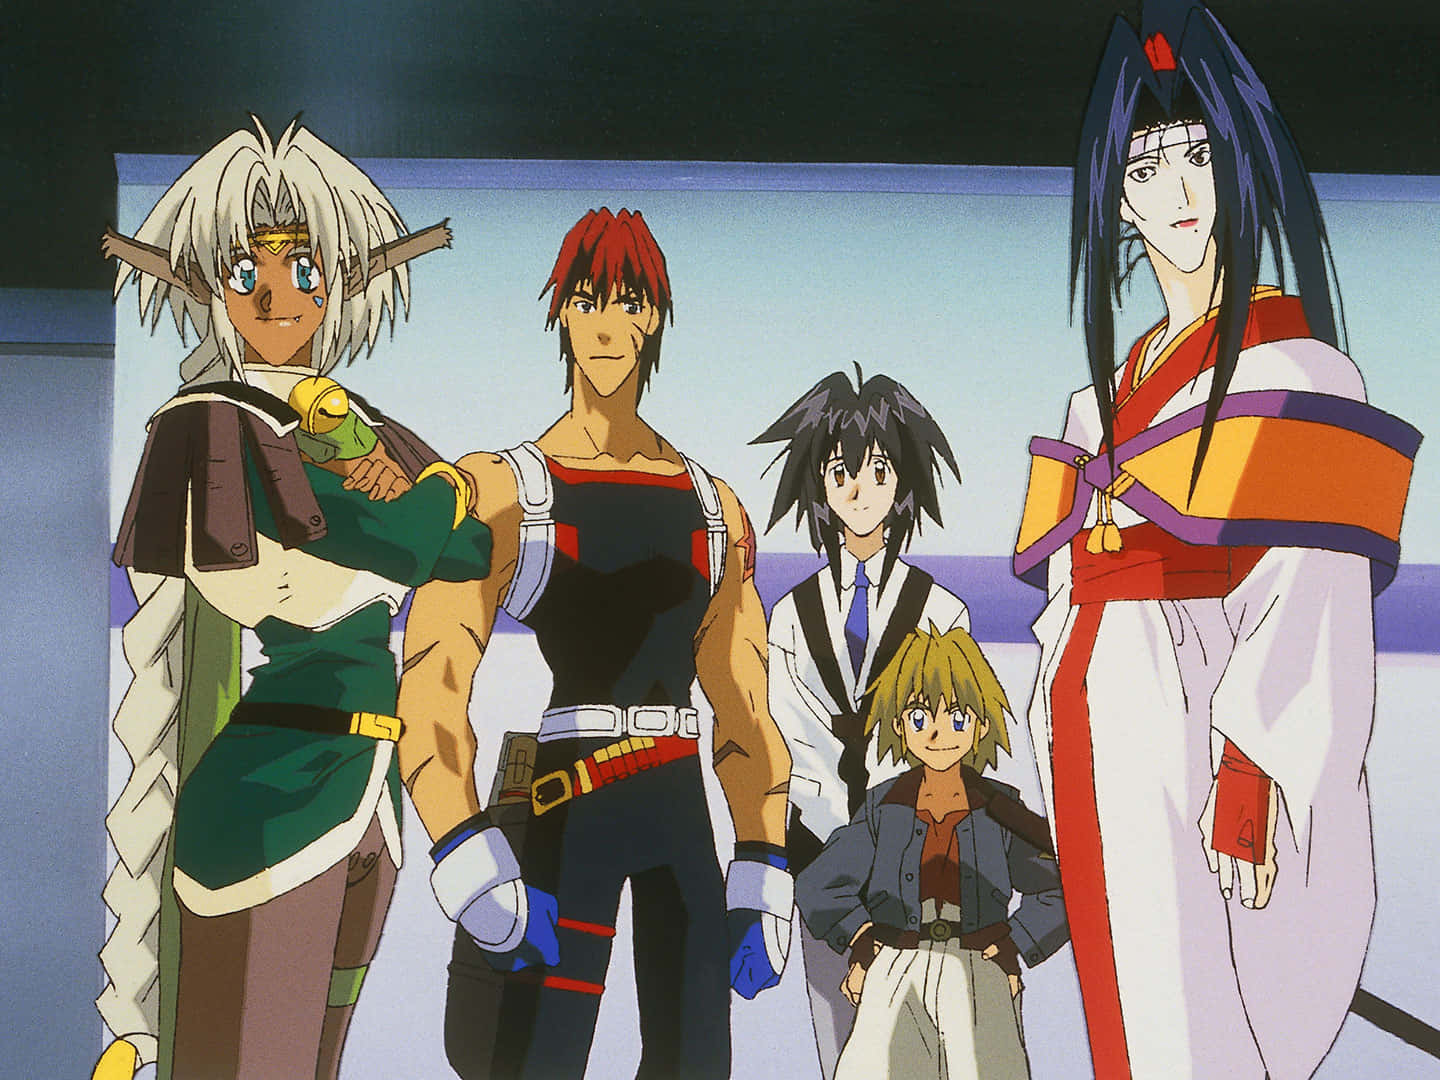 "Explore the Freedom and Excitement of Space in Outlaw Star!" Wallpaper